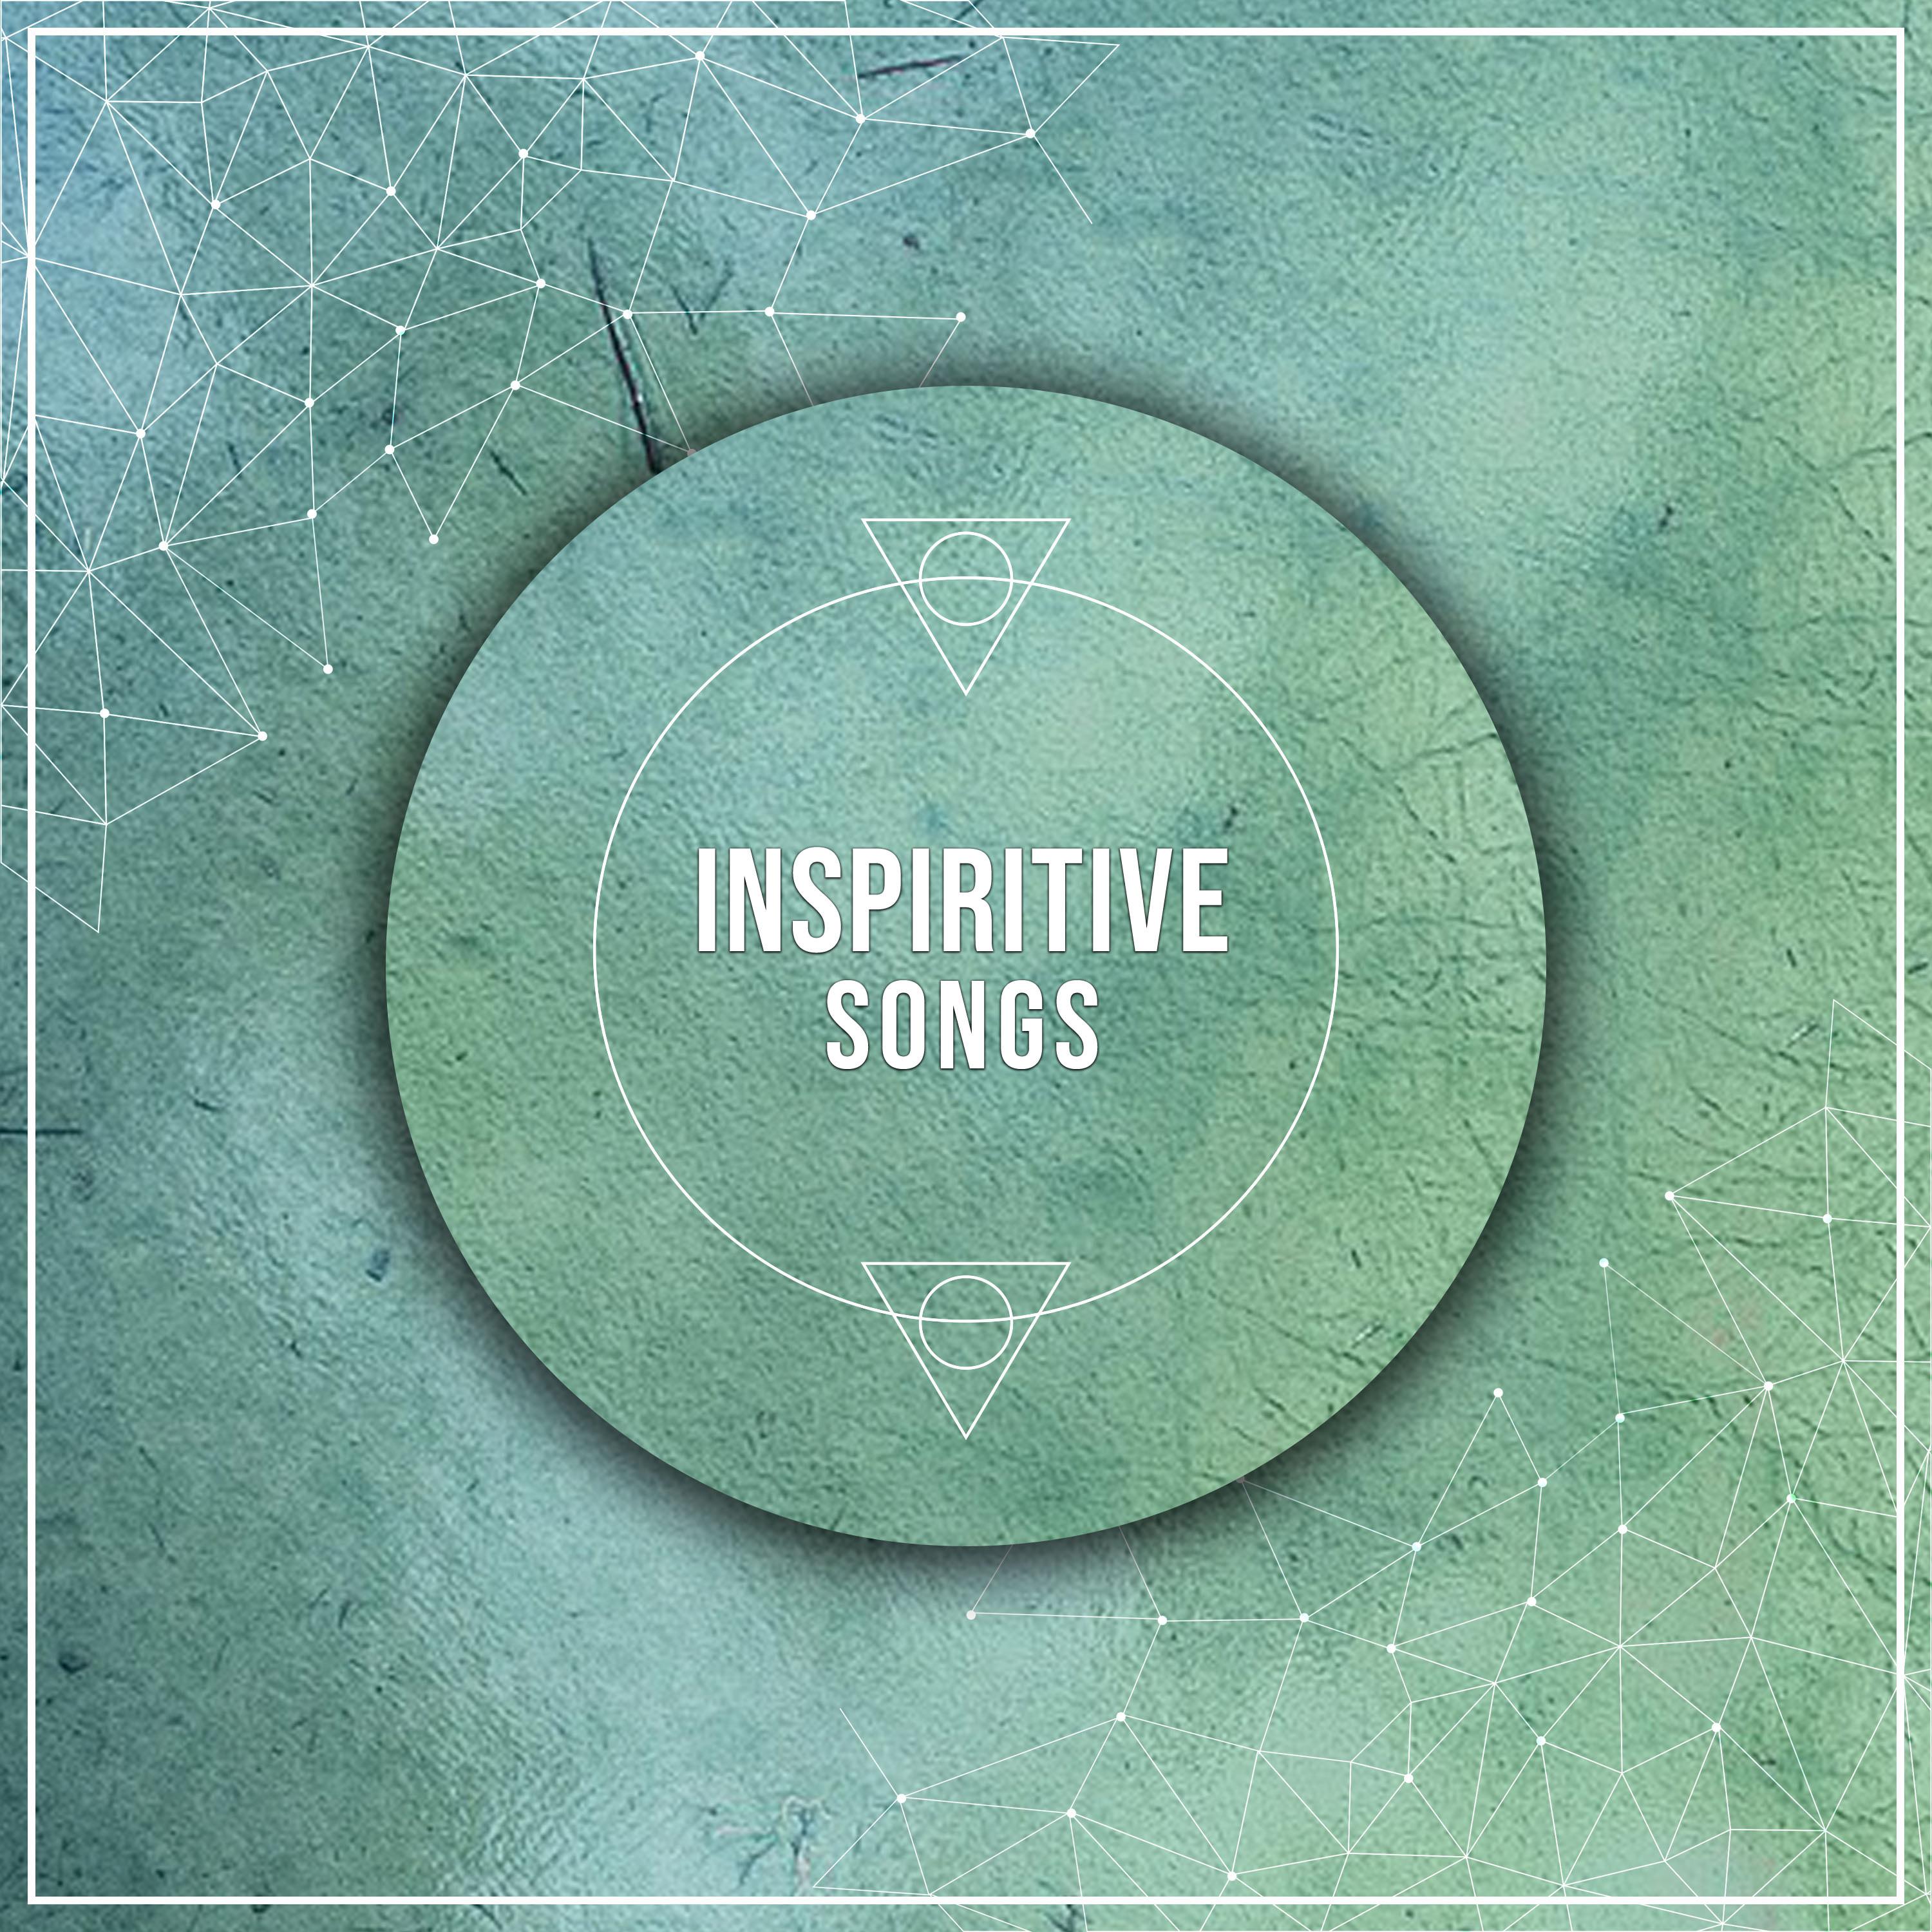 #15 Inspiritive Songs to Aid Meditation and Mindfulness